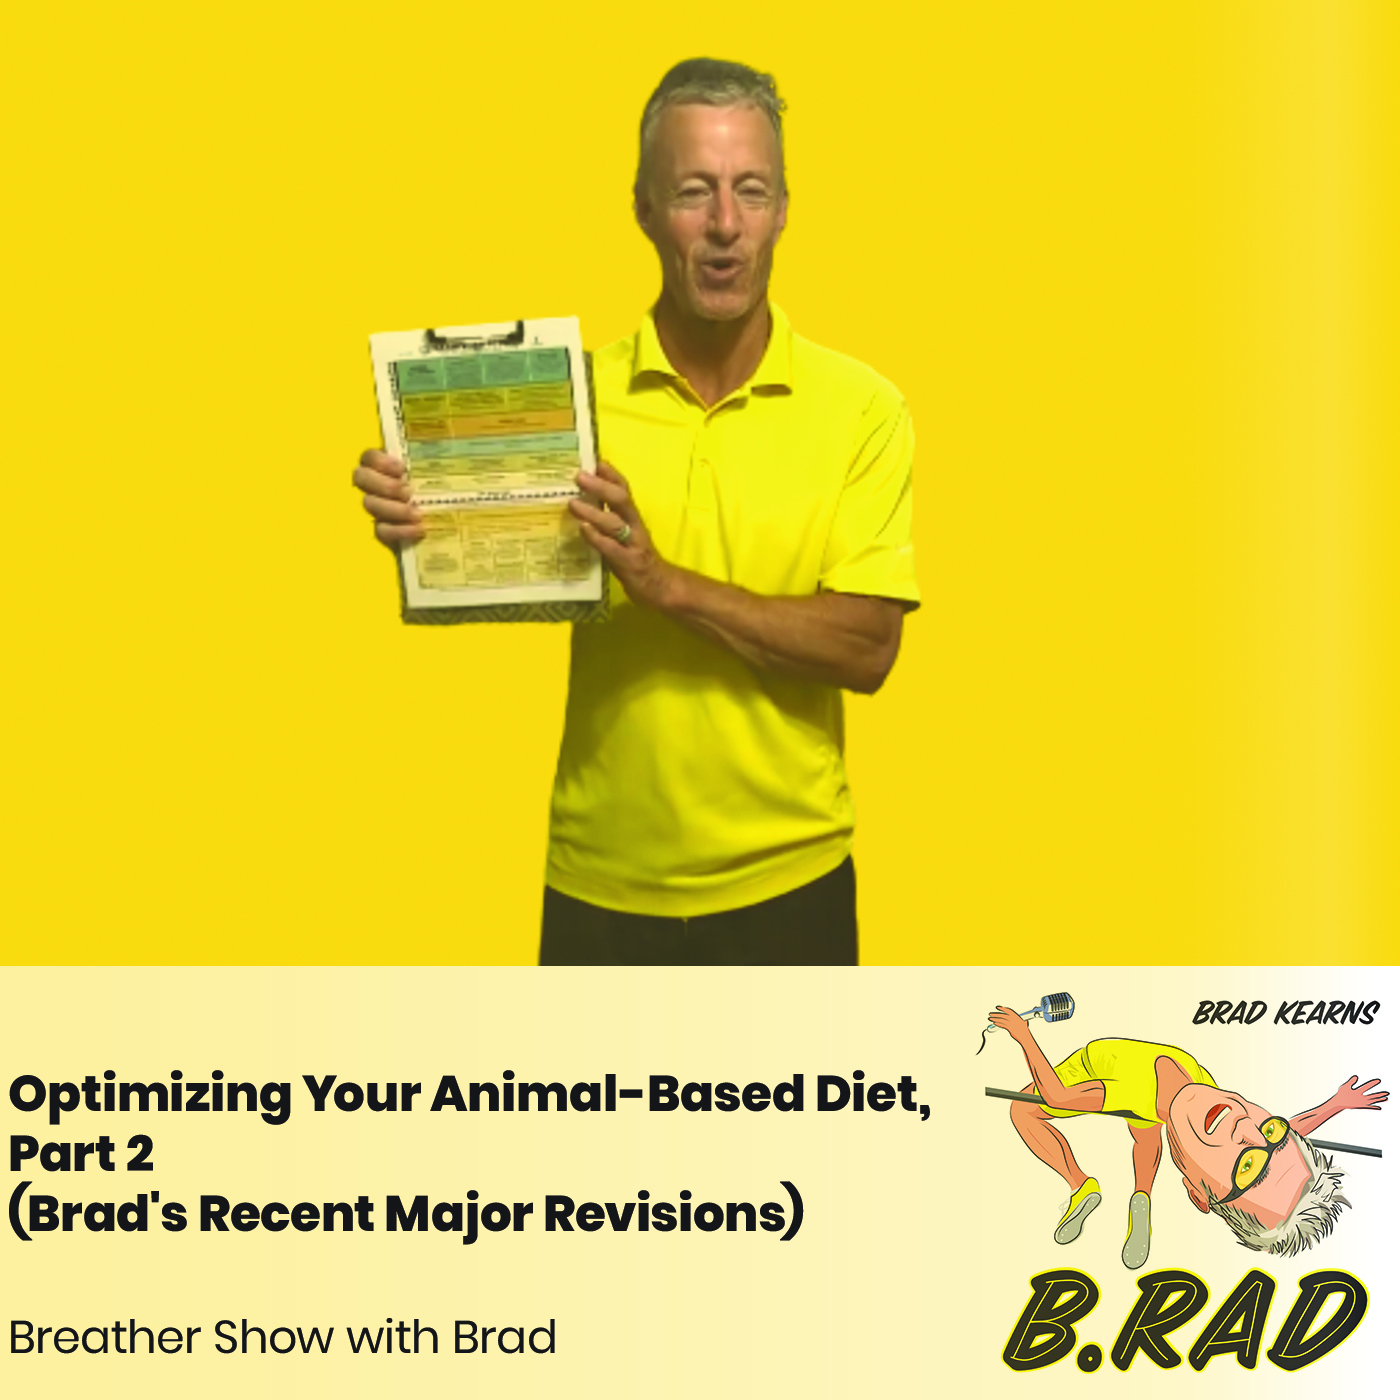 Optimizing Your Animal-Based Diet, Part 2: Brad's Recent Major Revisions (Brather Episode with Brad)